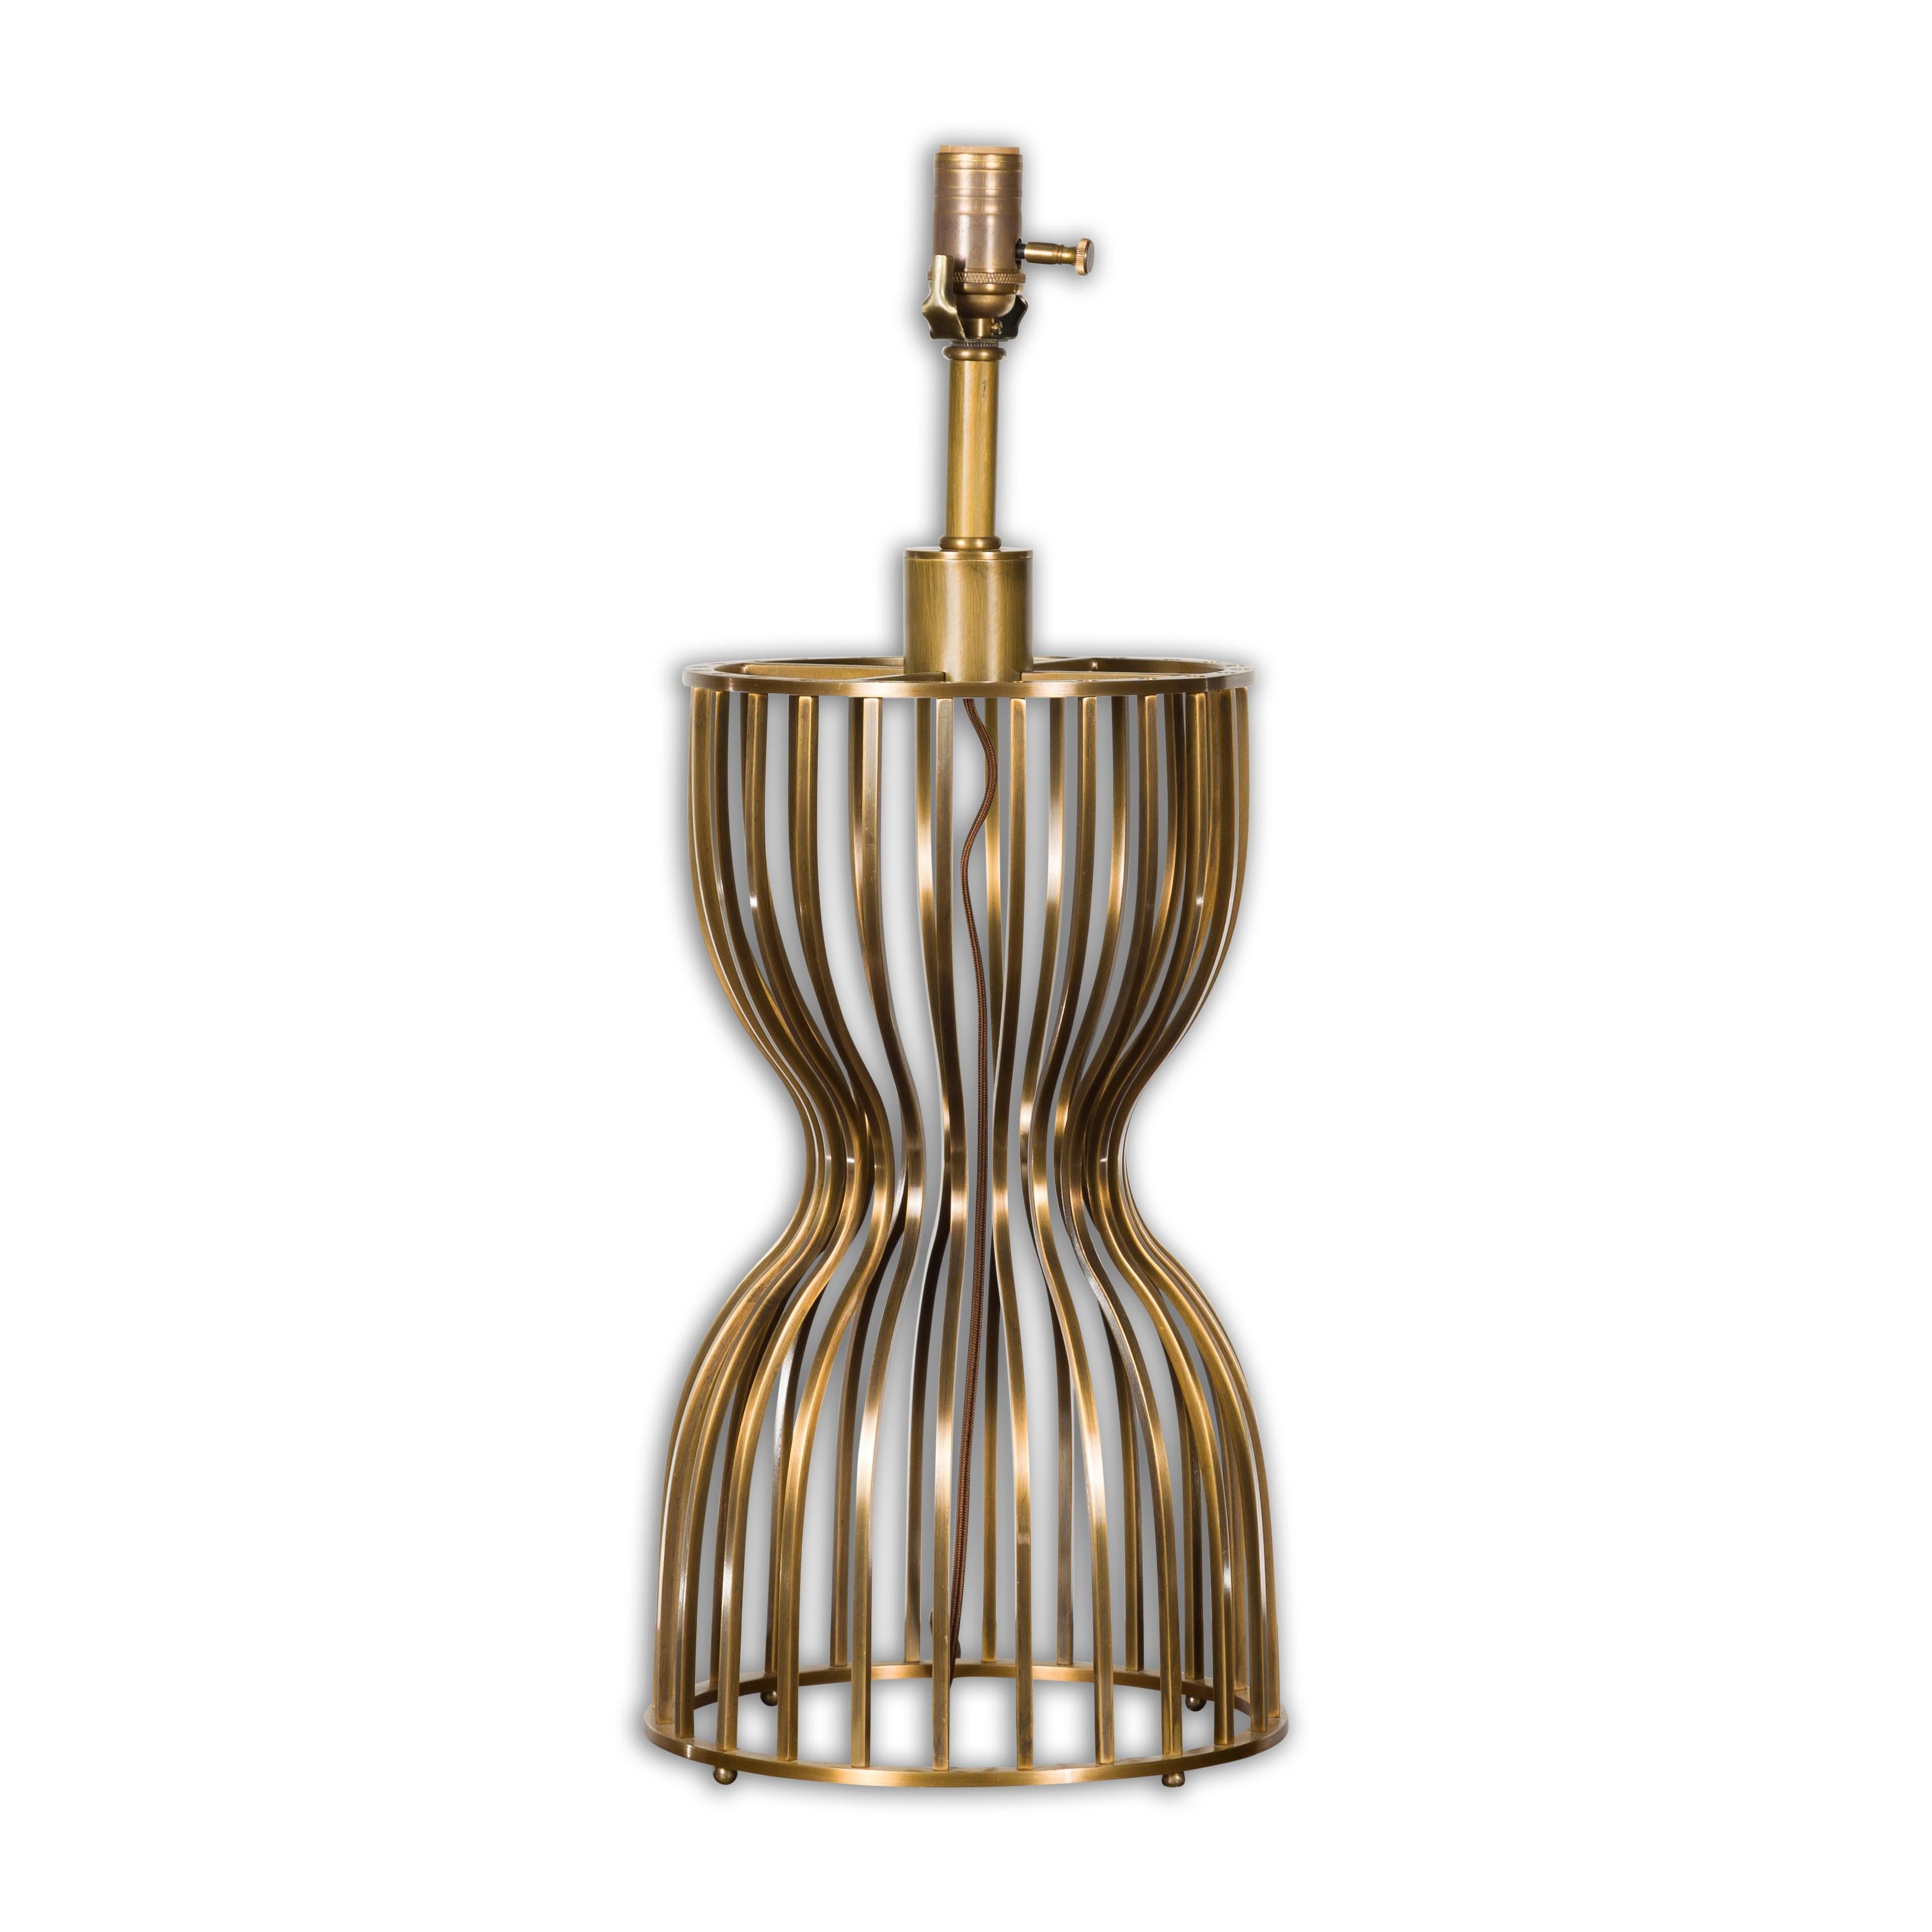 A Midcentury Modern Italian Brass hourglass shaped table lamp with single socket and newly and professionally rewired for the US. Radiating Midcentury Modern elegance, this Italian Brass hourglass-shaped table lamp offers both form and